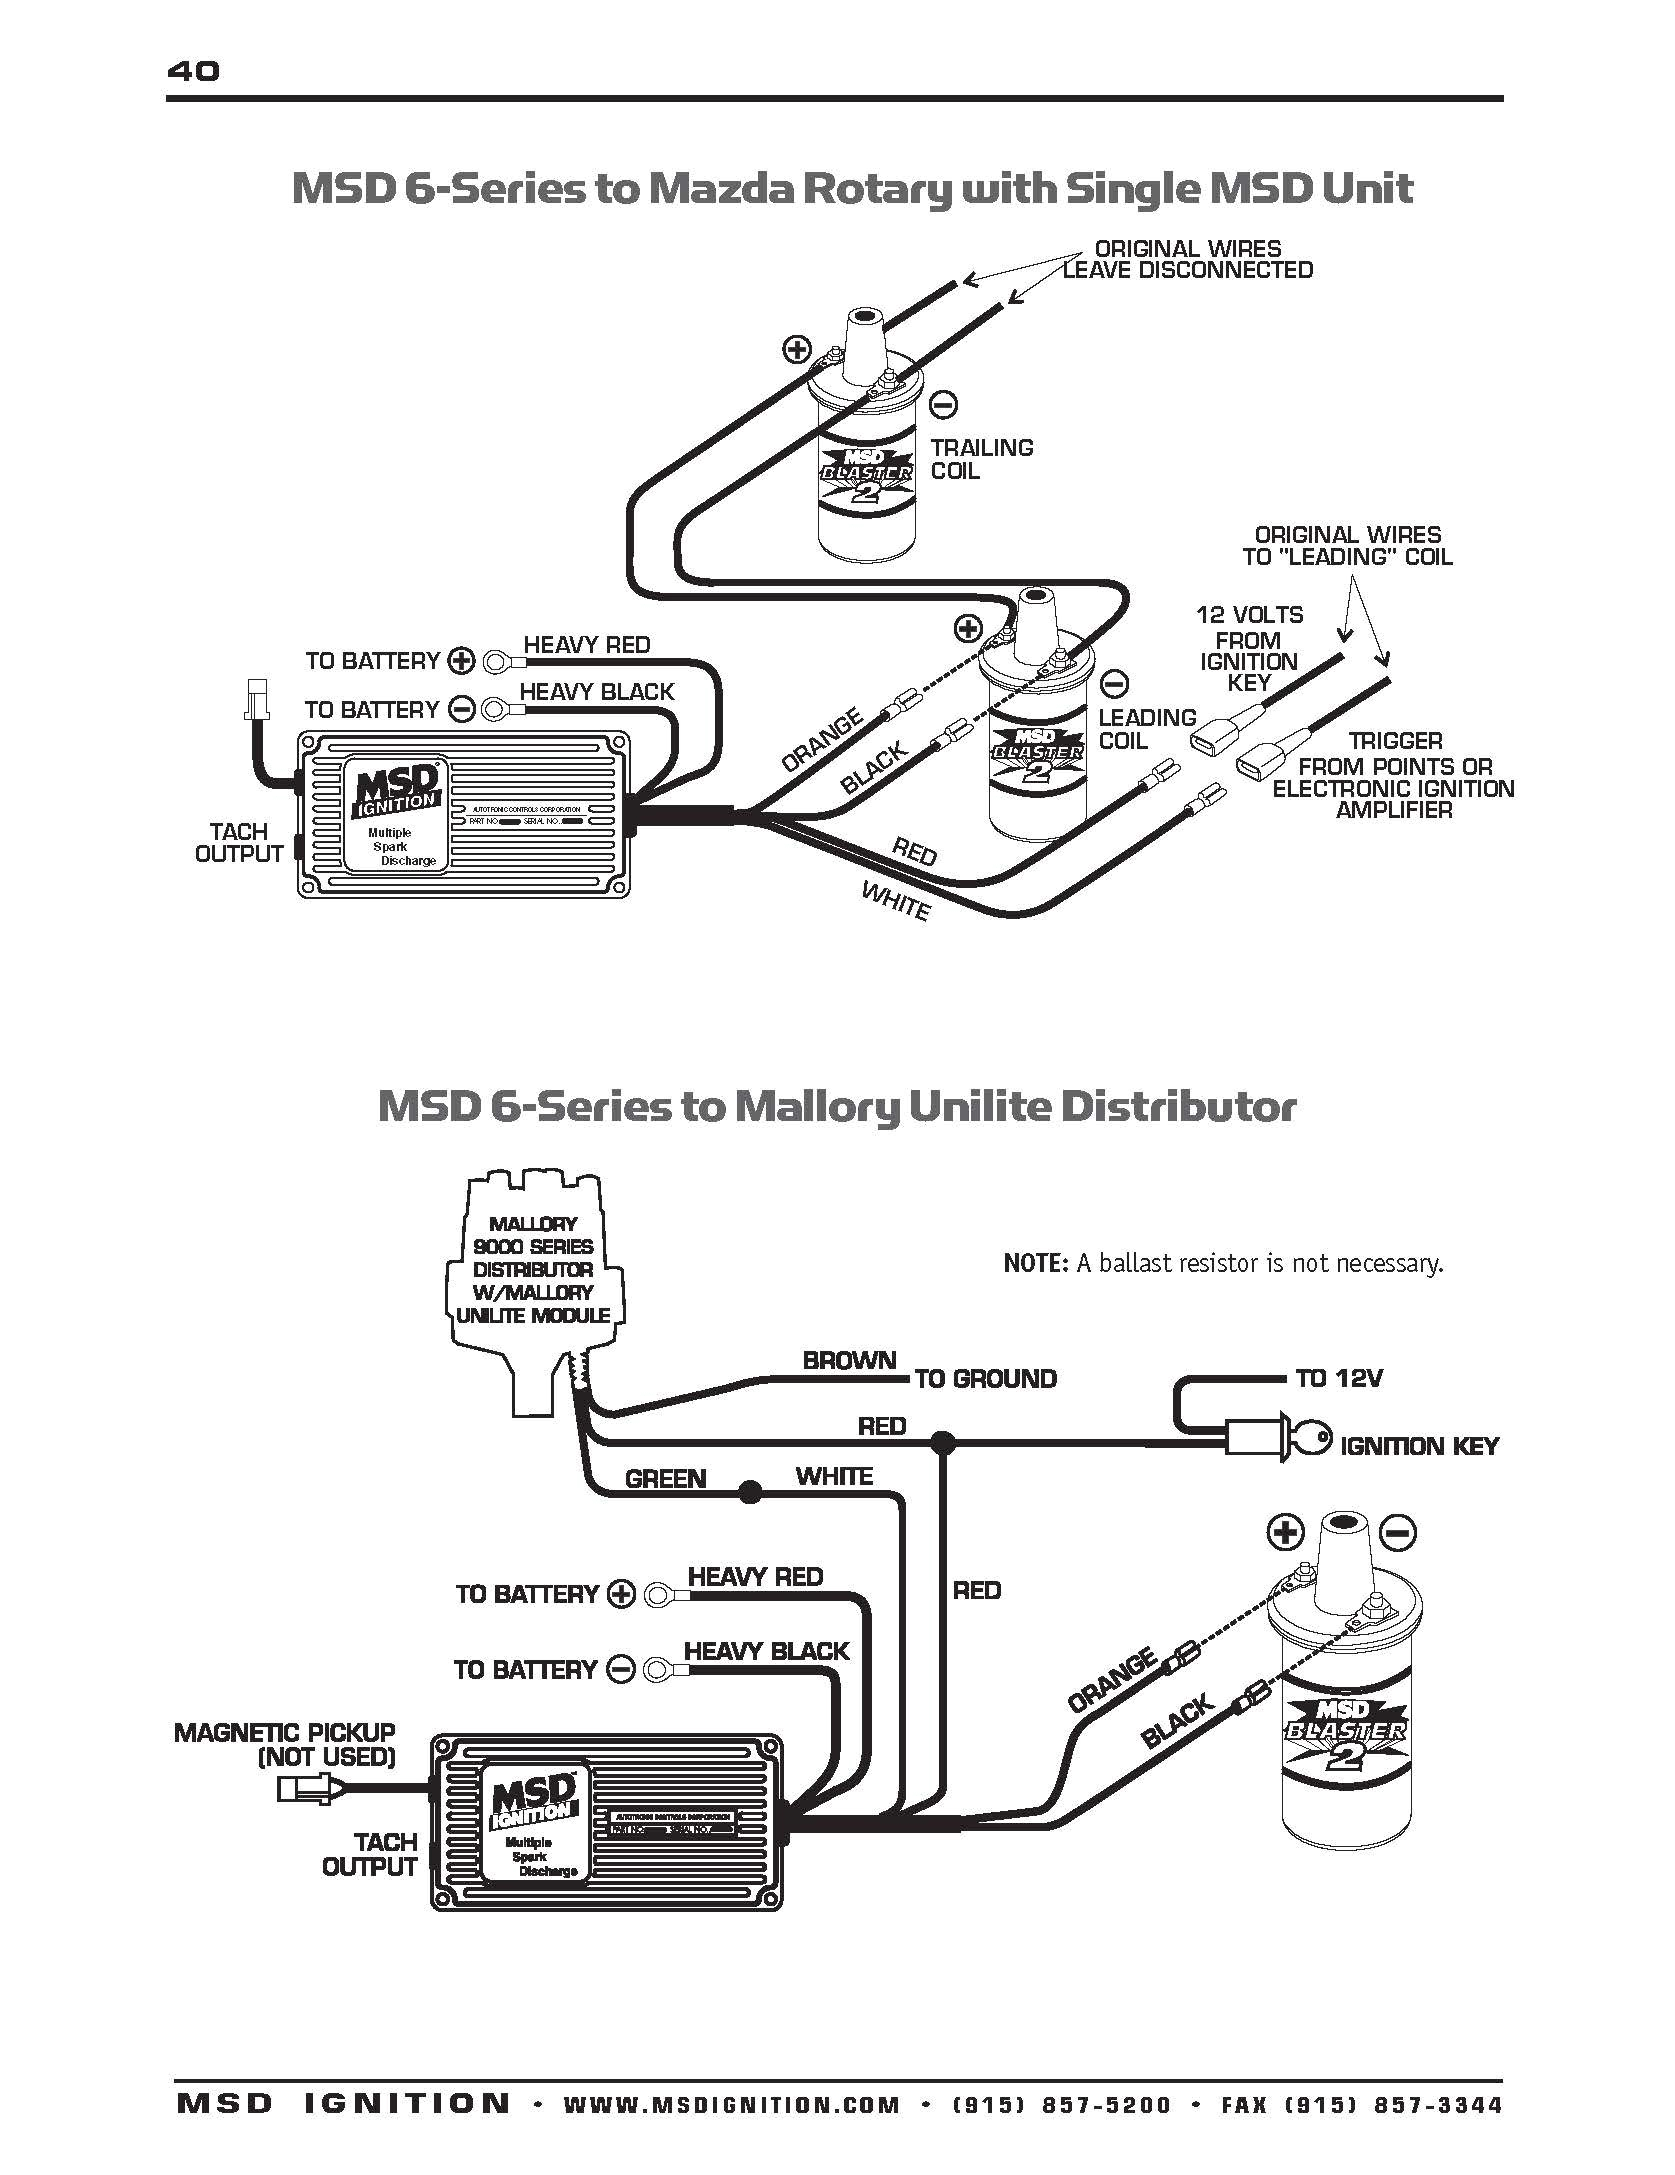 mallory 6a ignition wiring diagram wiring diagram mallory ignition wiring diagram pro 9000 wiring diagram viewmallory